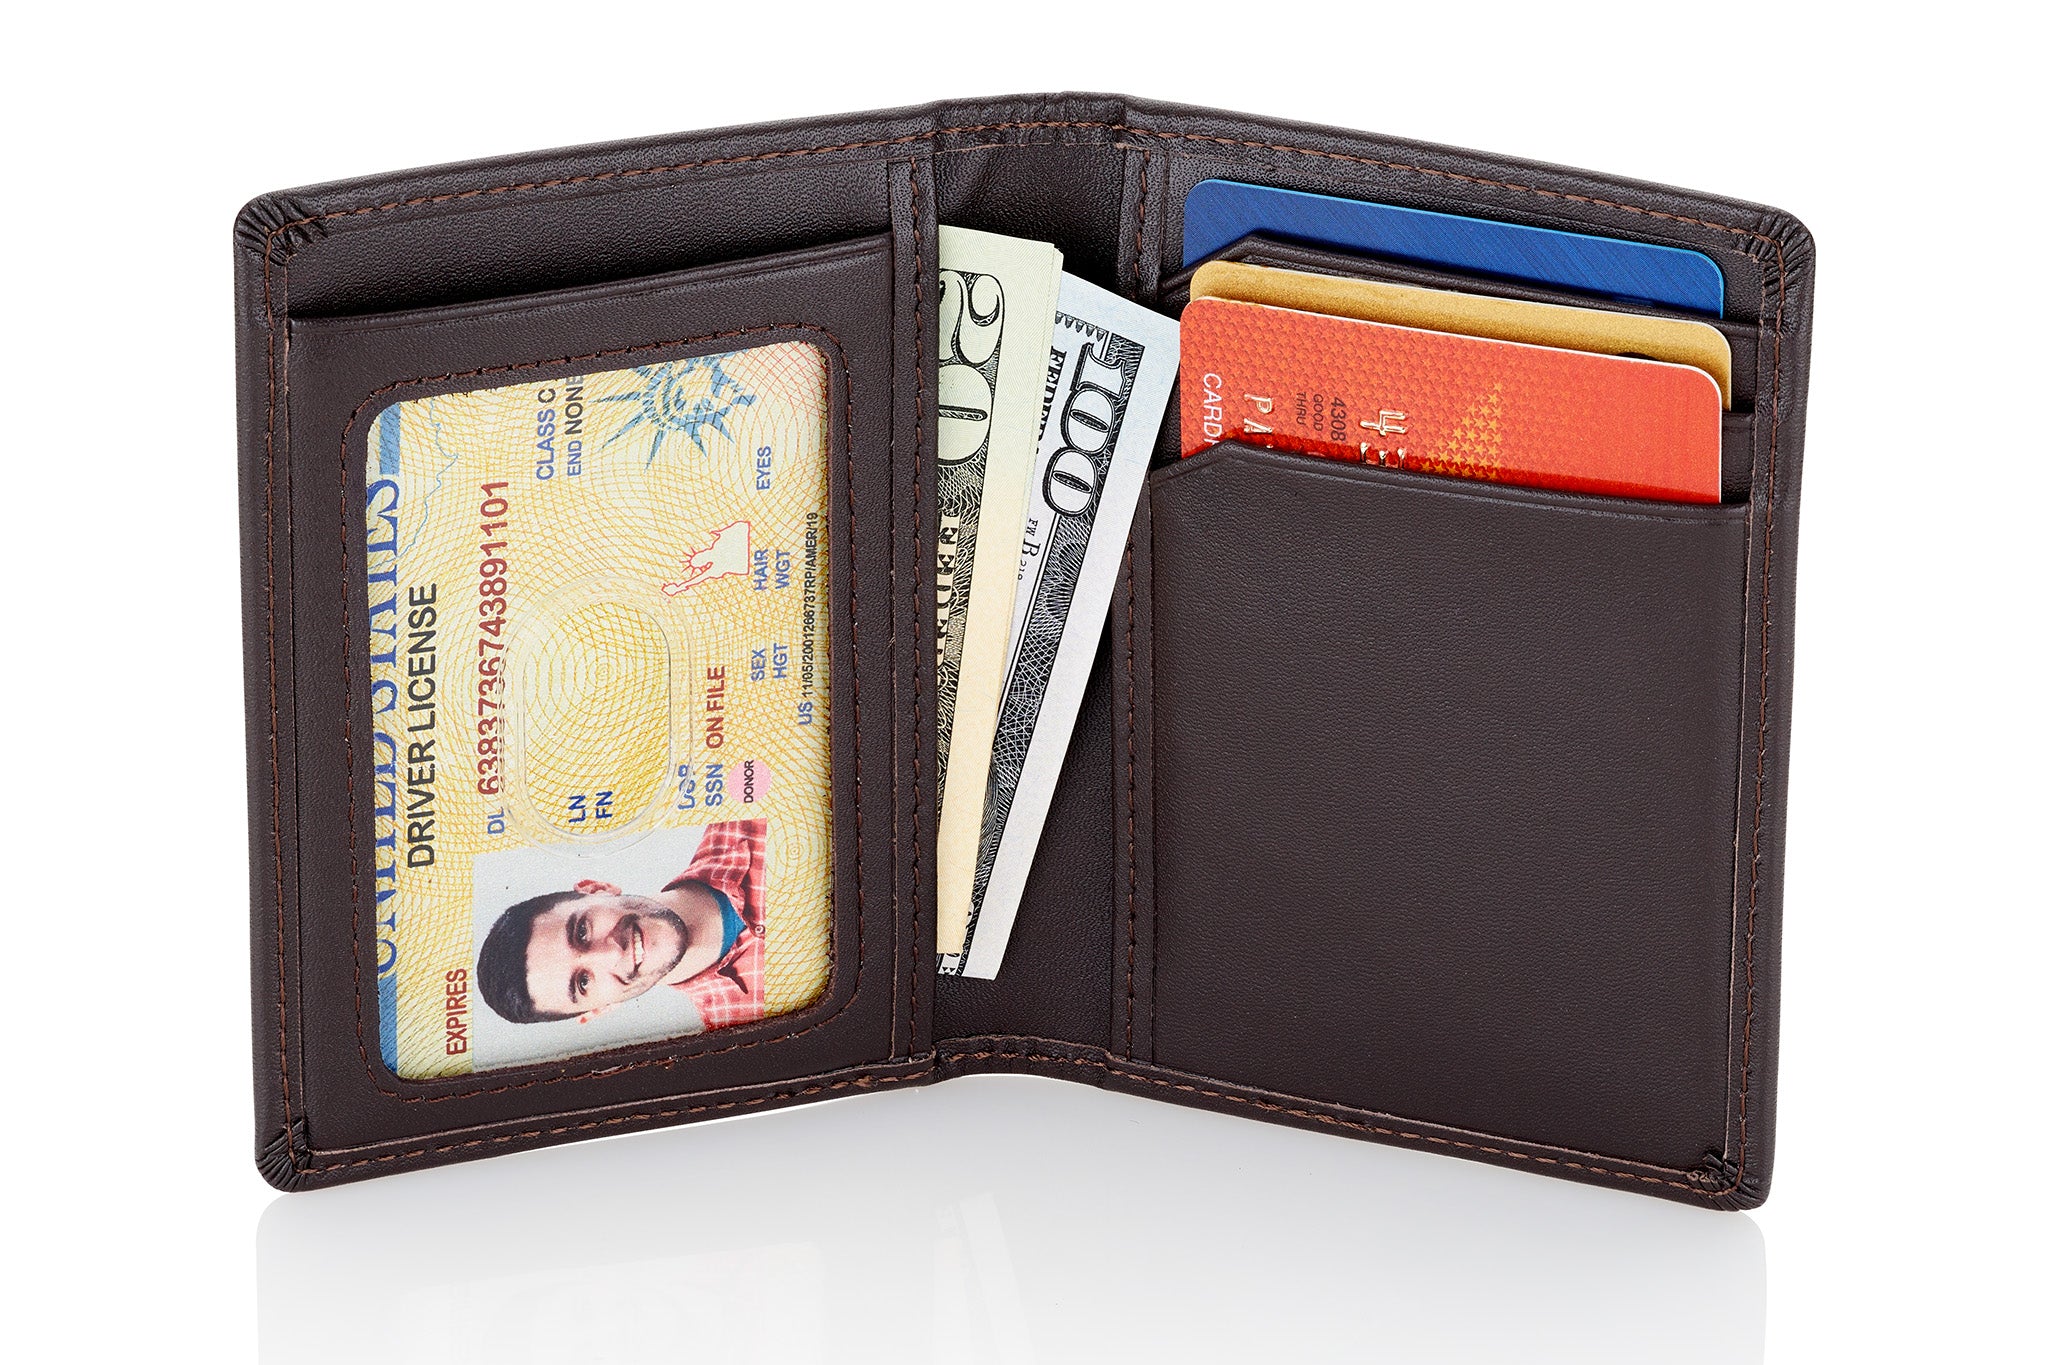 Front Pocket Privacy Card Wallet